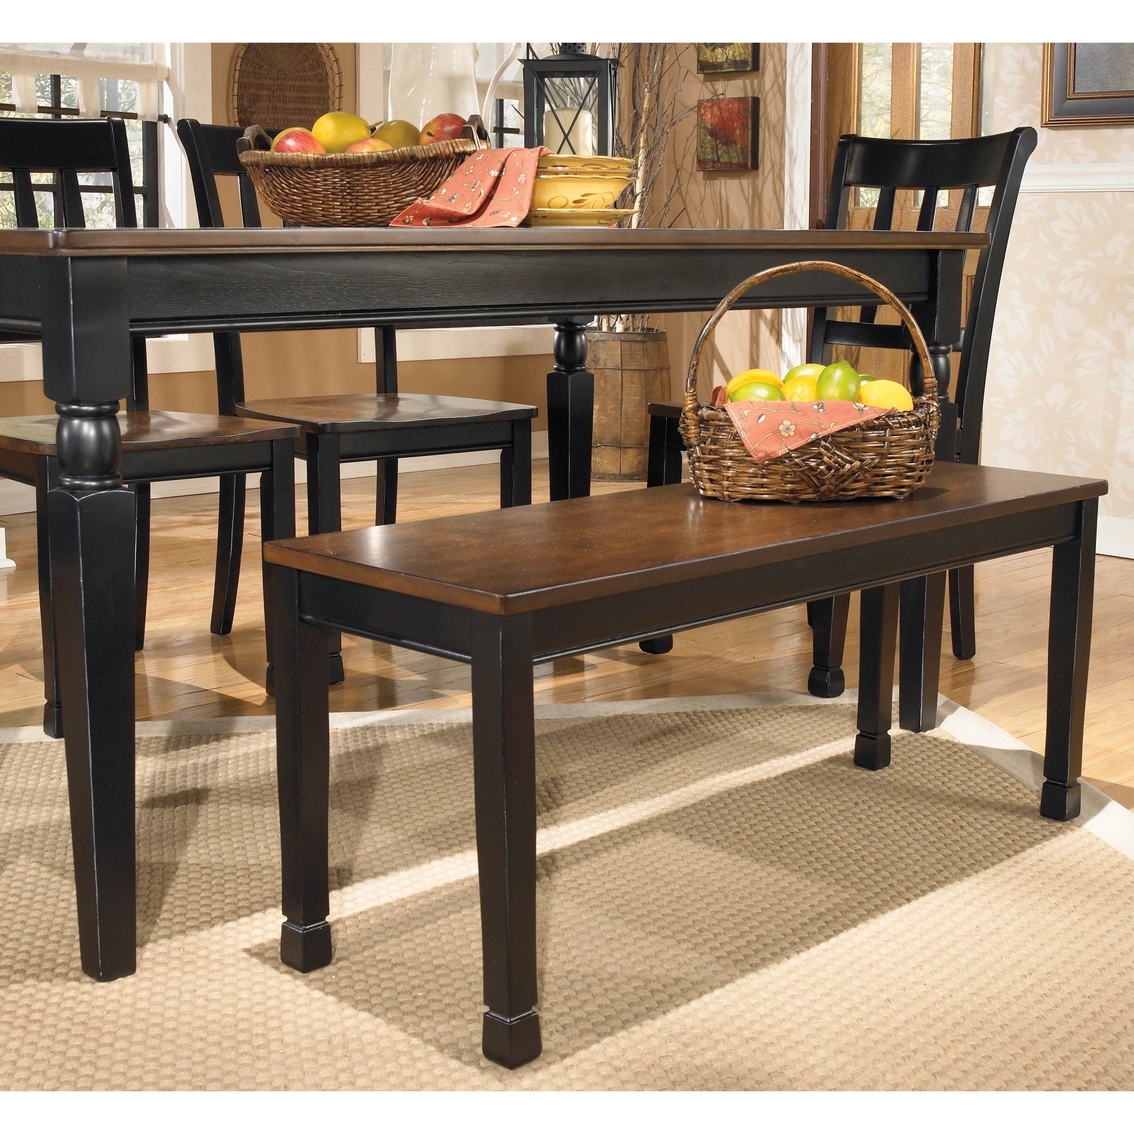 Signature Design by Ashley Owingsville Large Dining Room Bench - Image 2 of 3